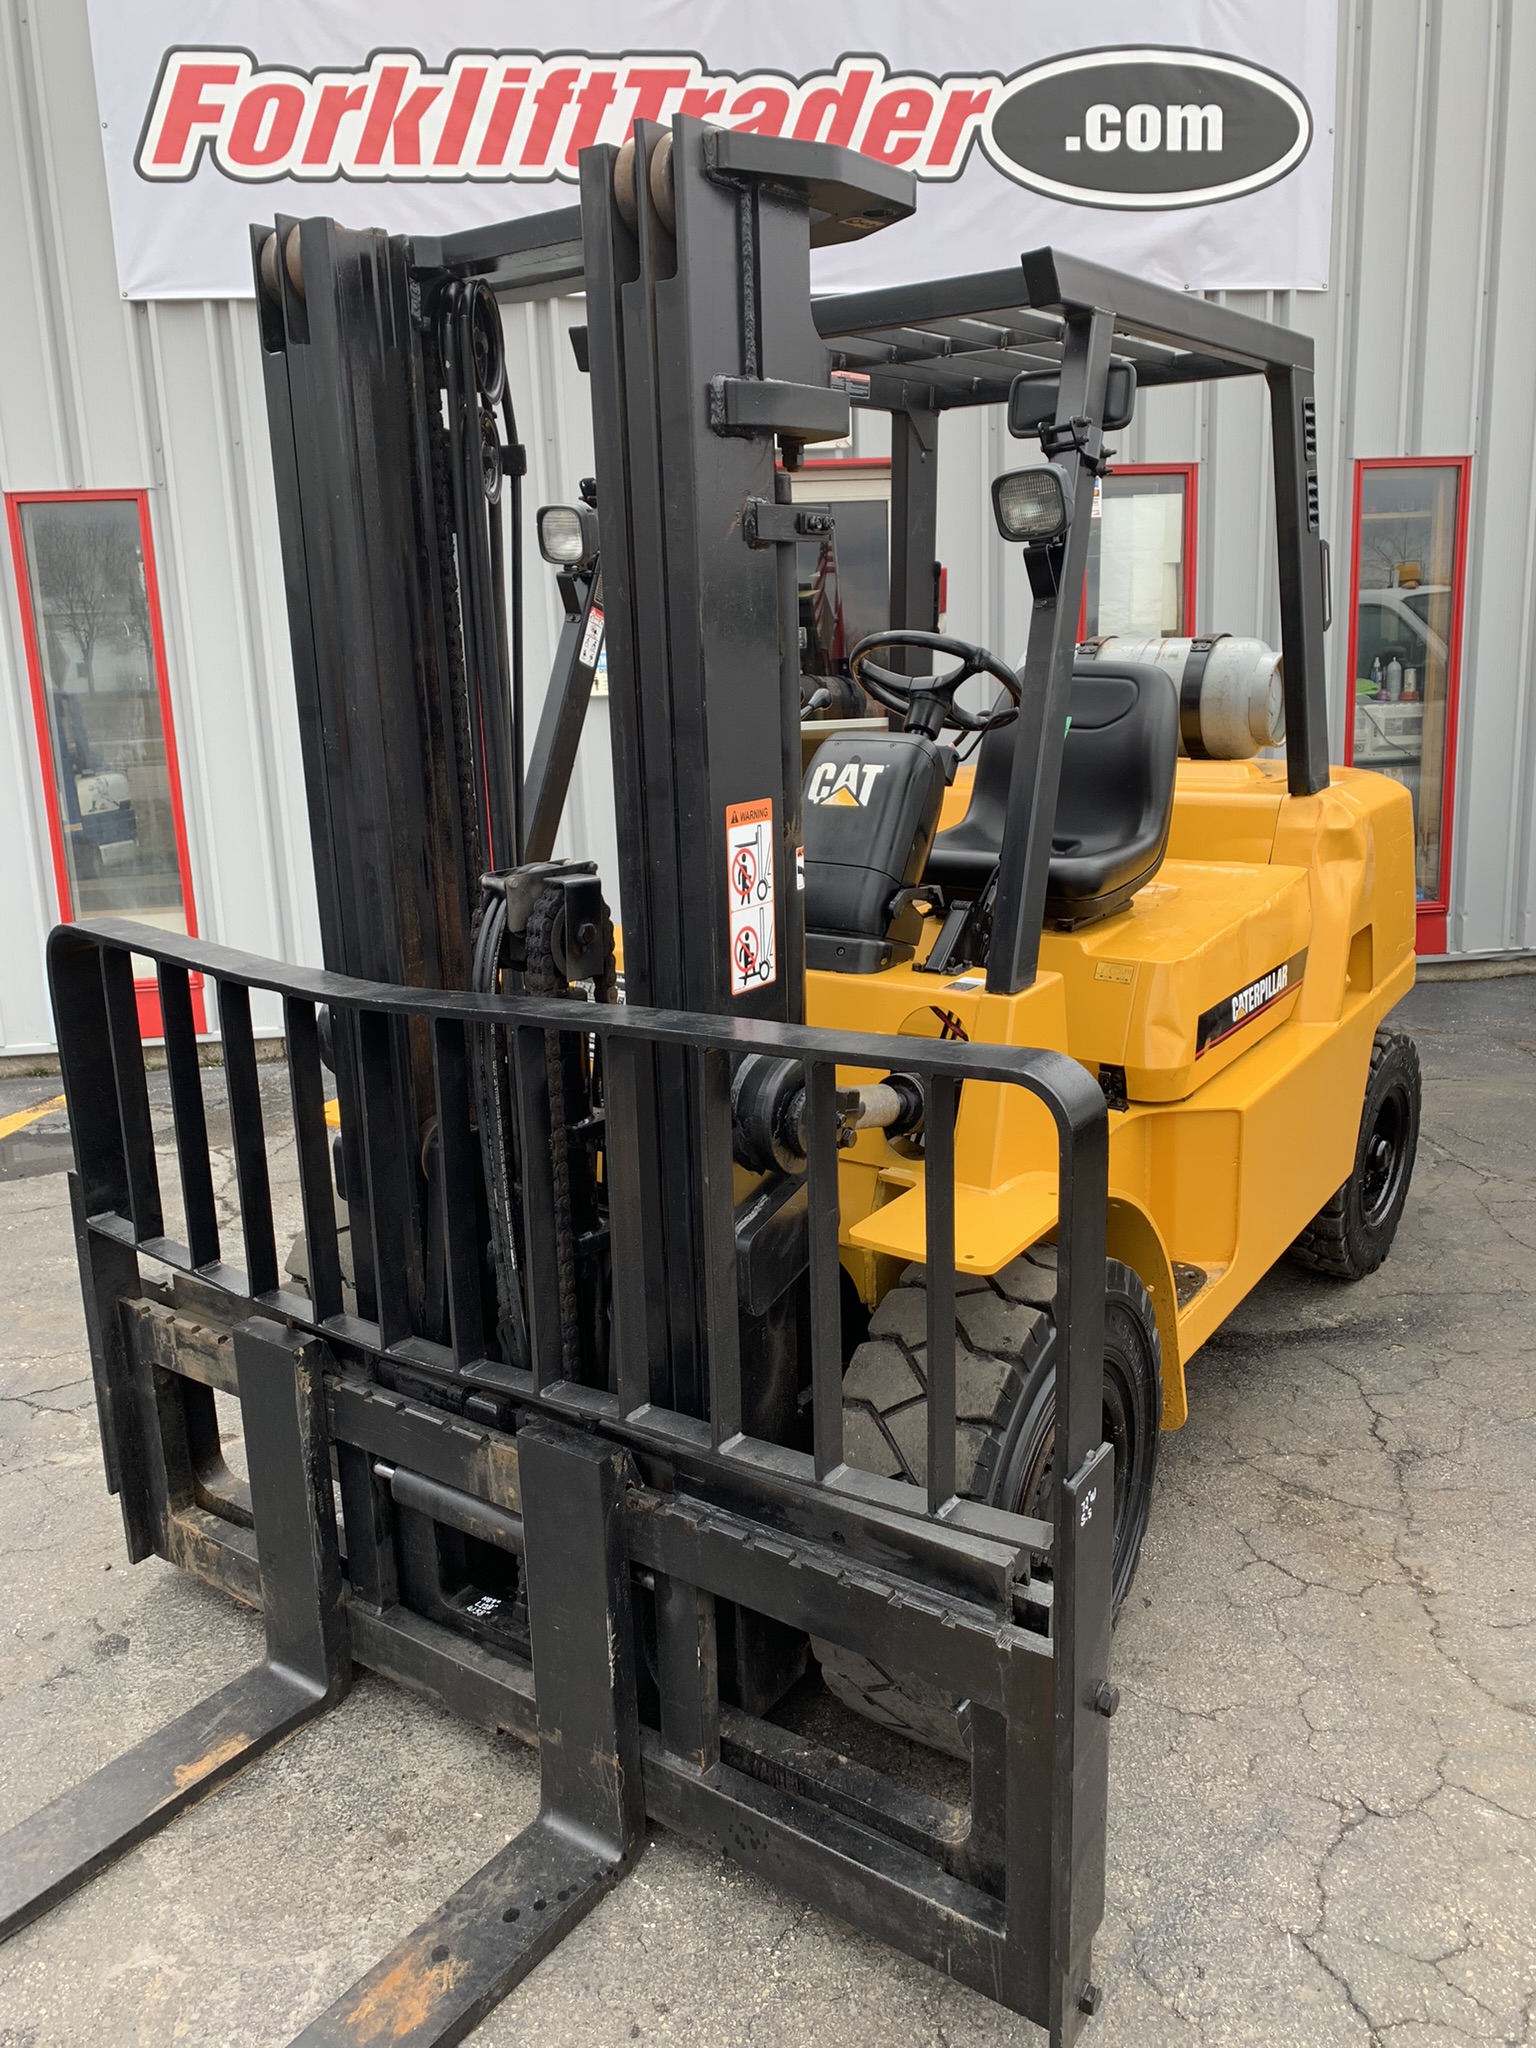 48" forks yellow caterpillar forklift for sale